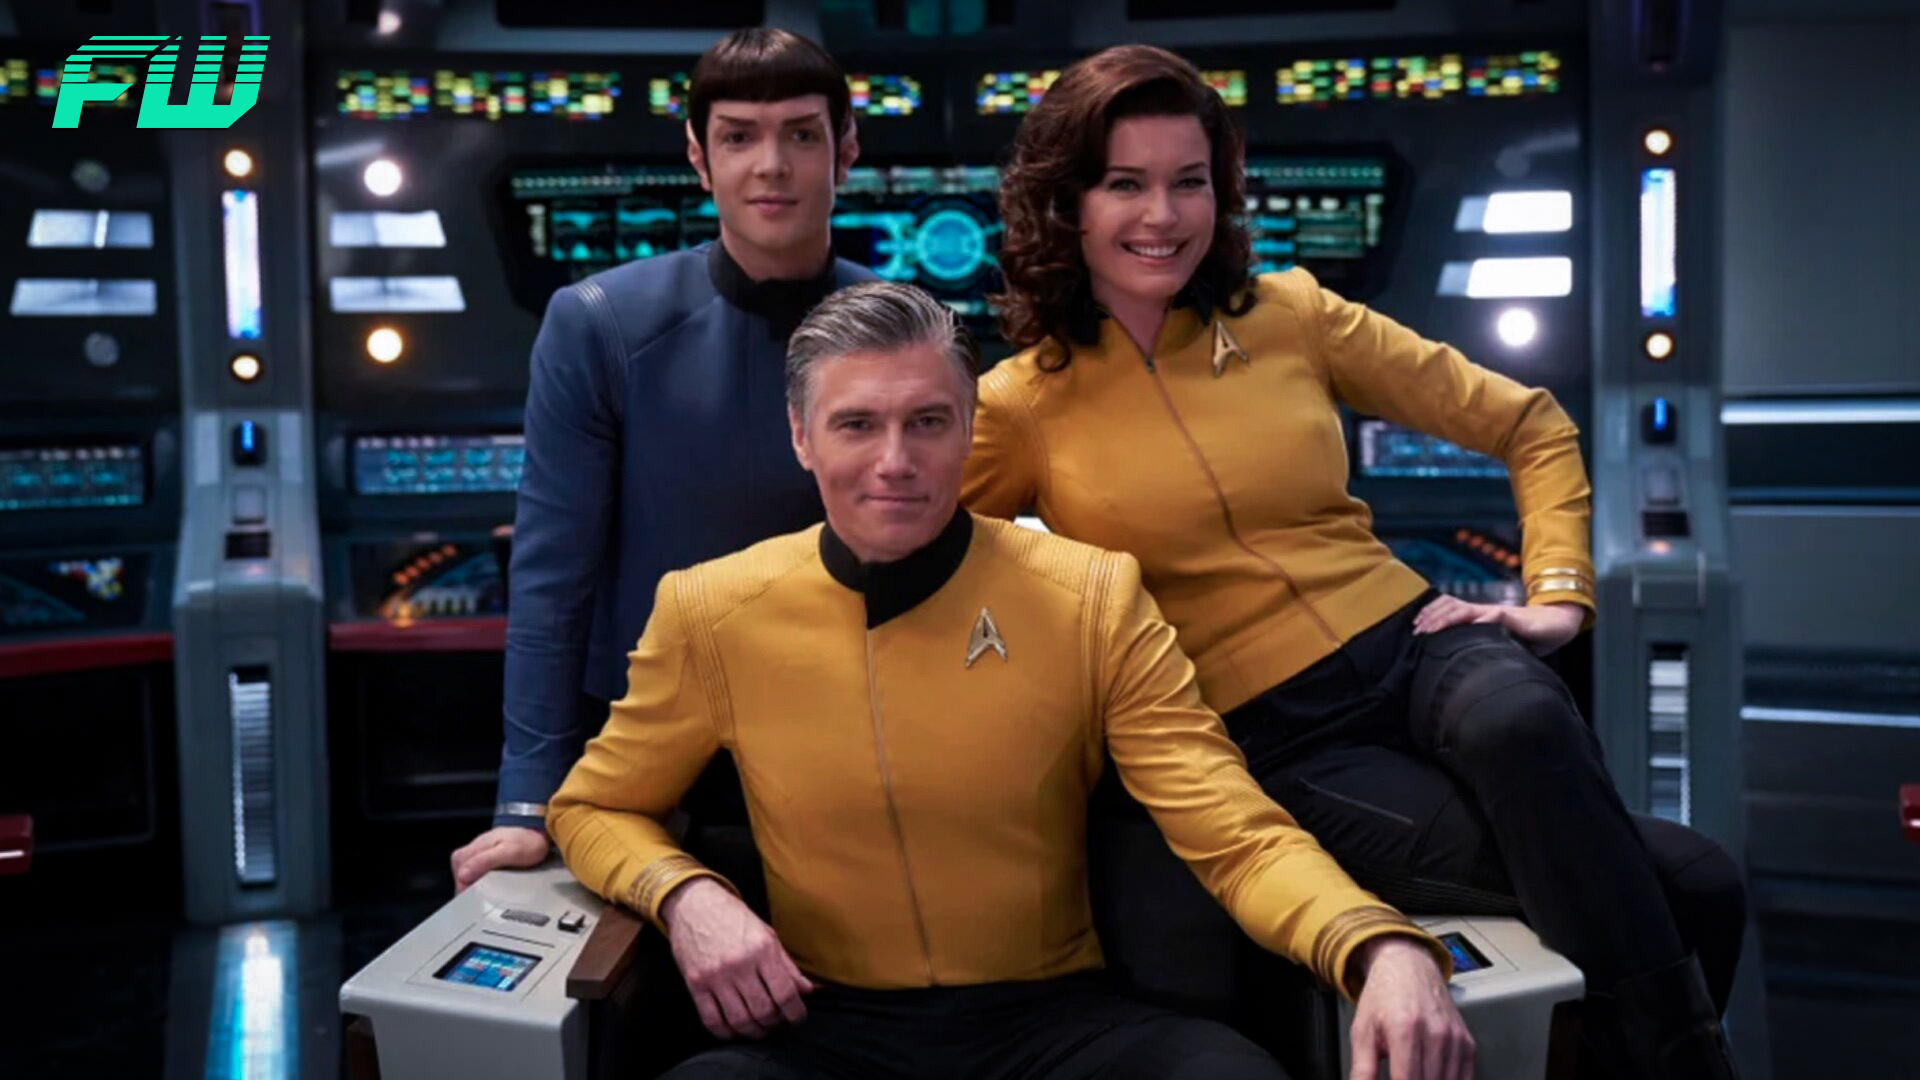 Star Trek Pike Spock Series Coming to CBS All Access